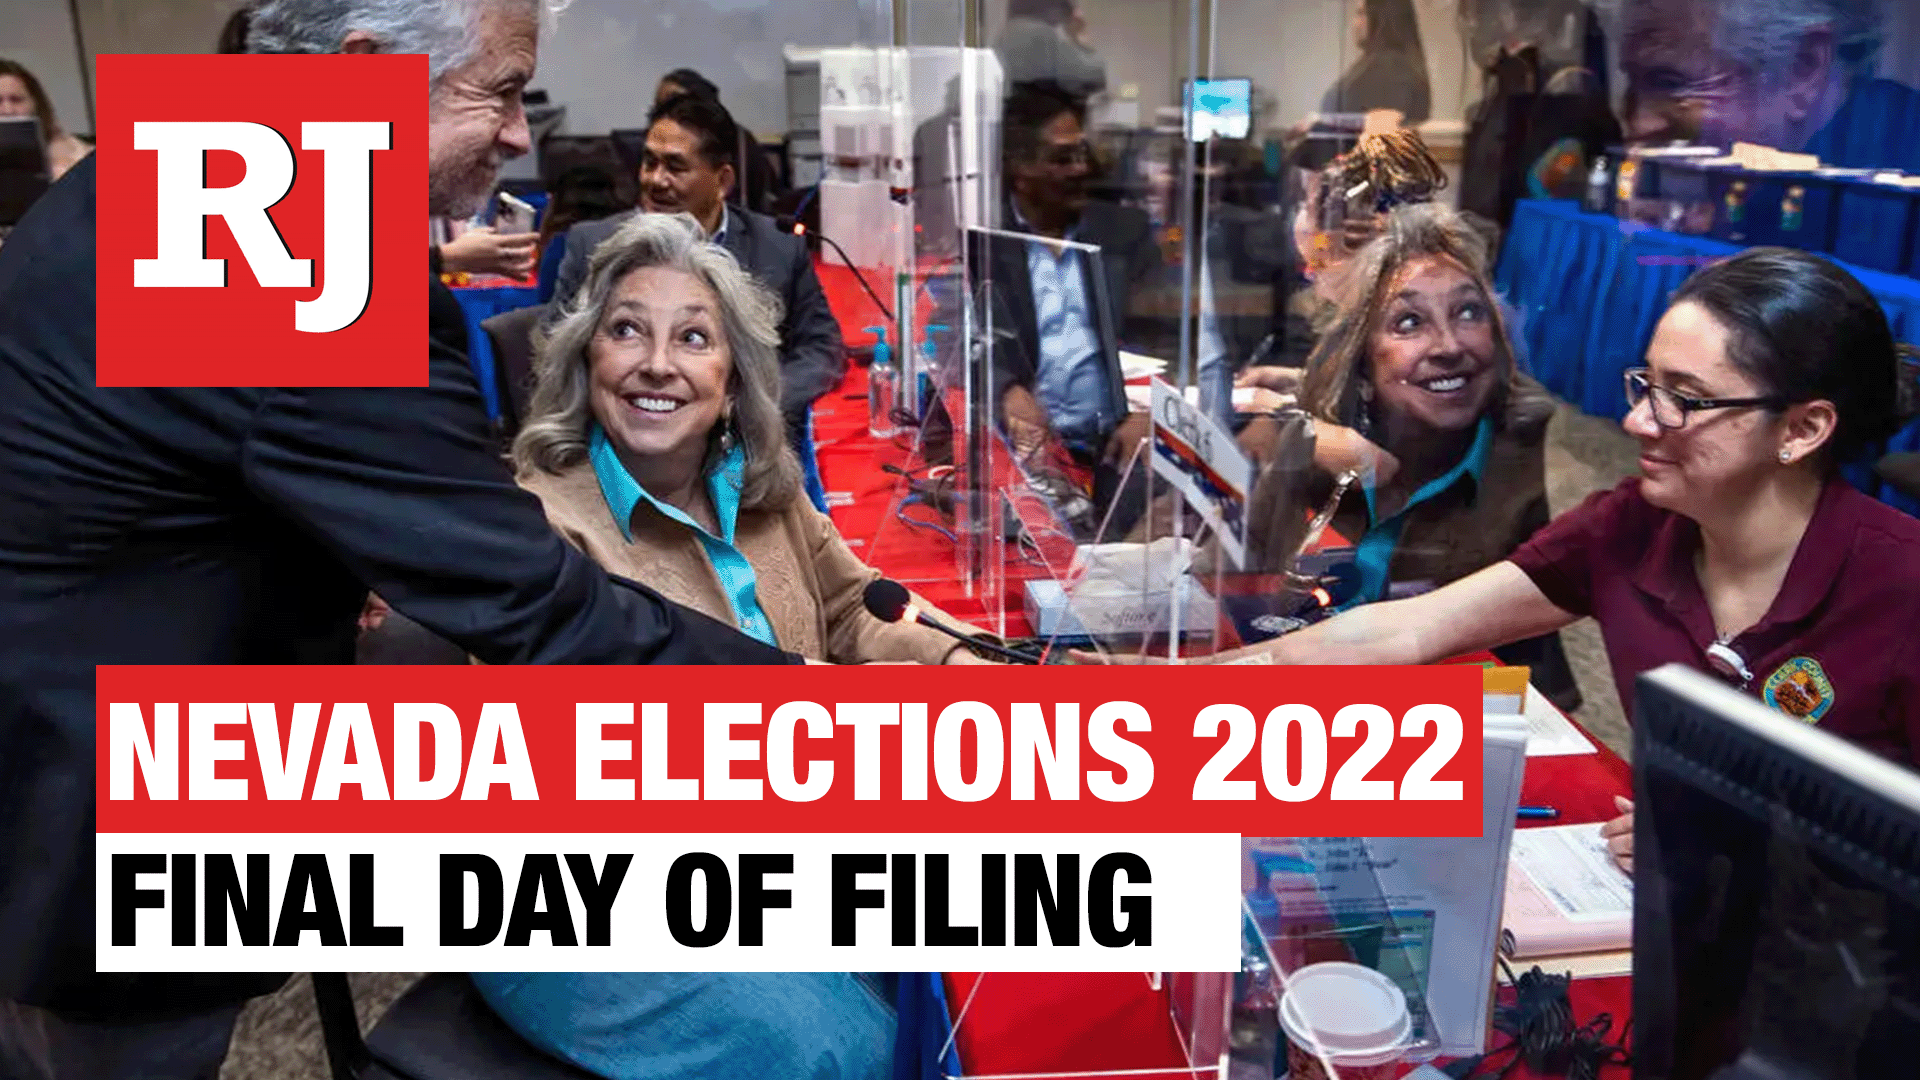 Final Day of Filing for Nevada Elections 2022: Steve Sebelius Discusses the Candidates